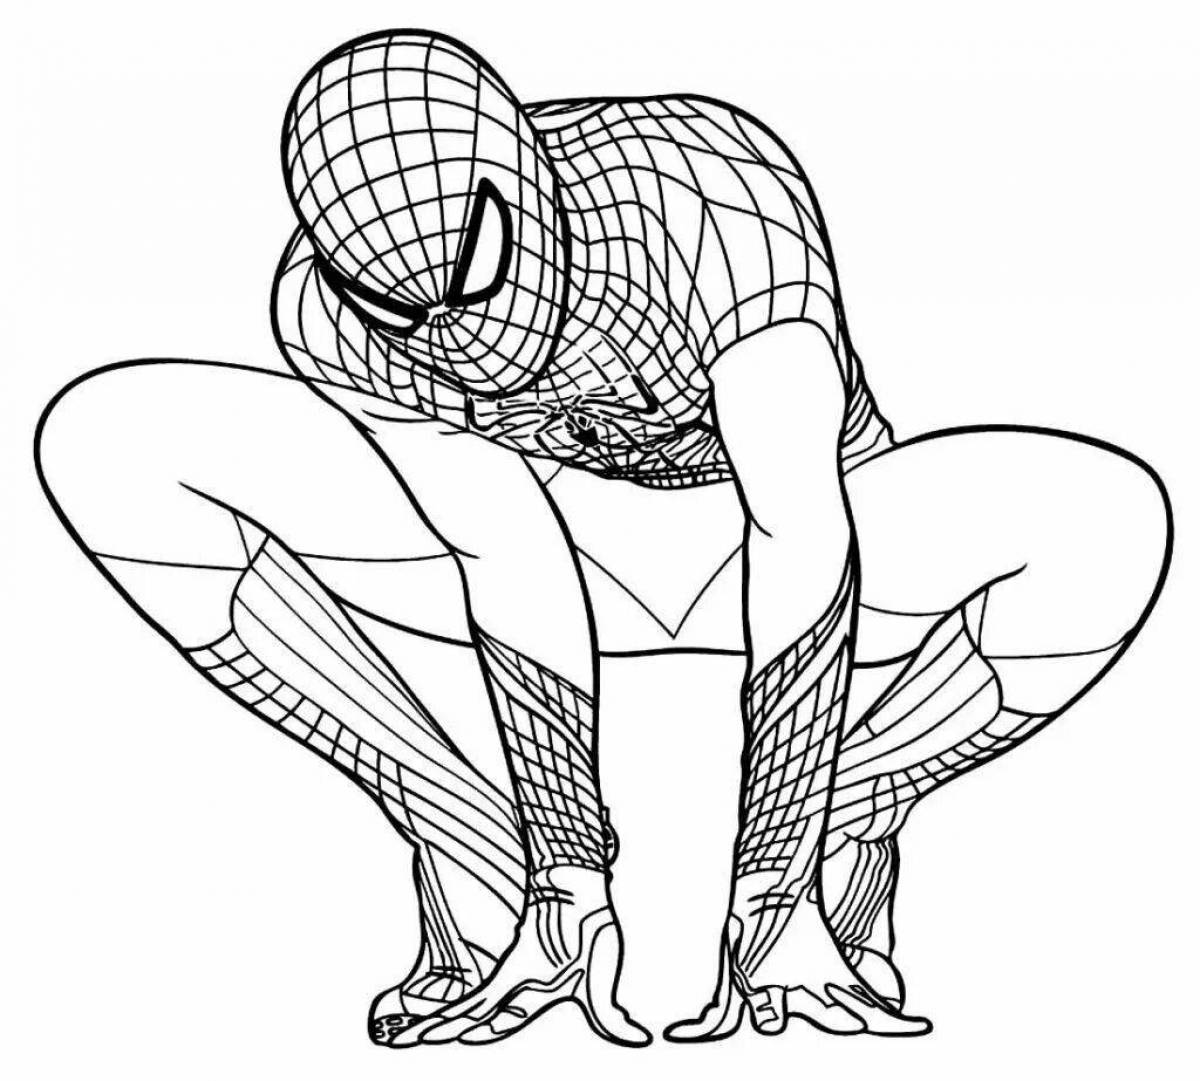 Tobey maguire spiderman glitter coloring book